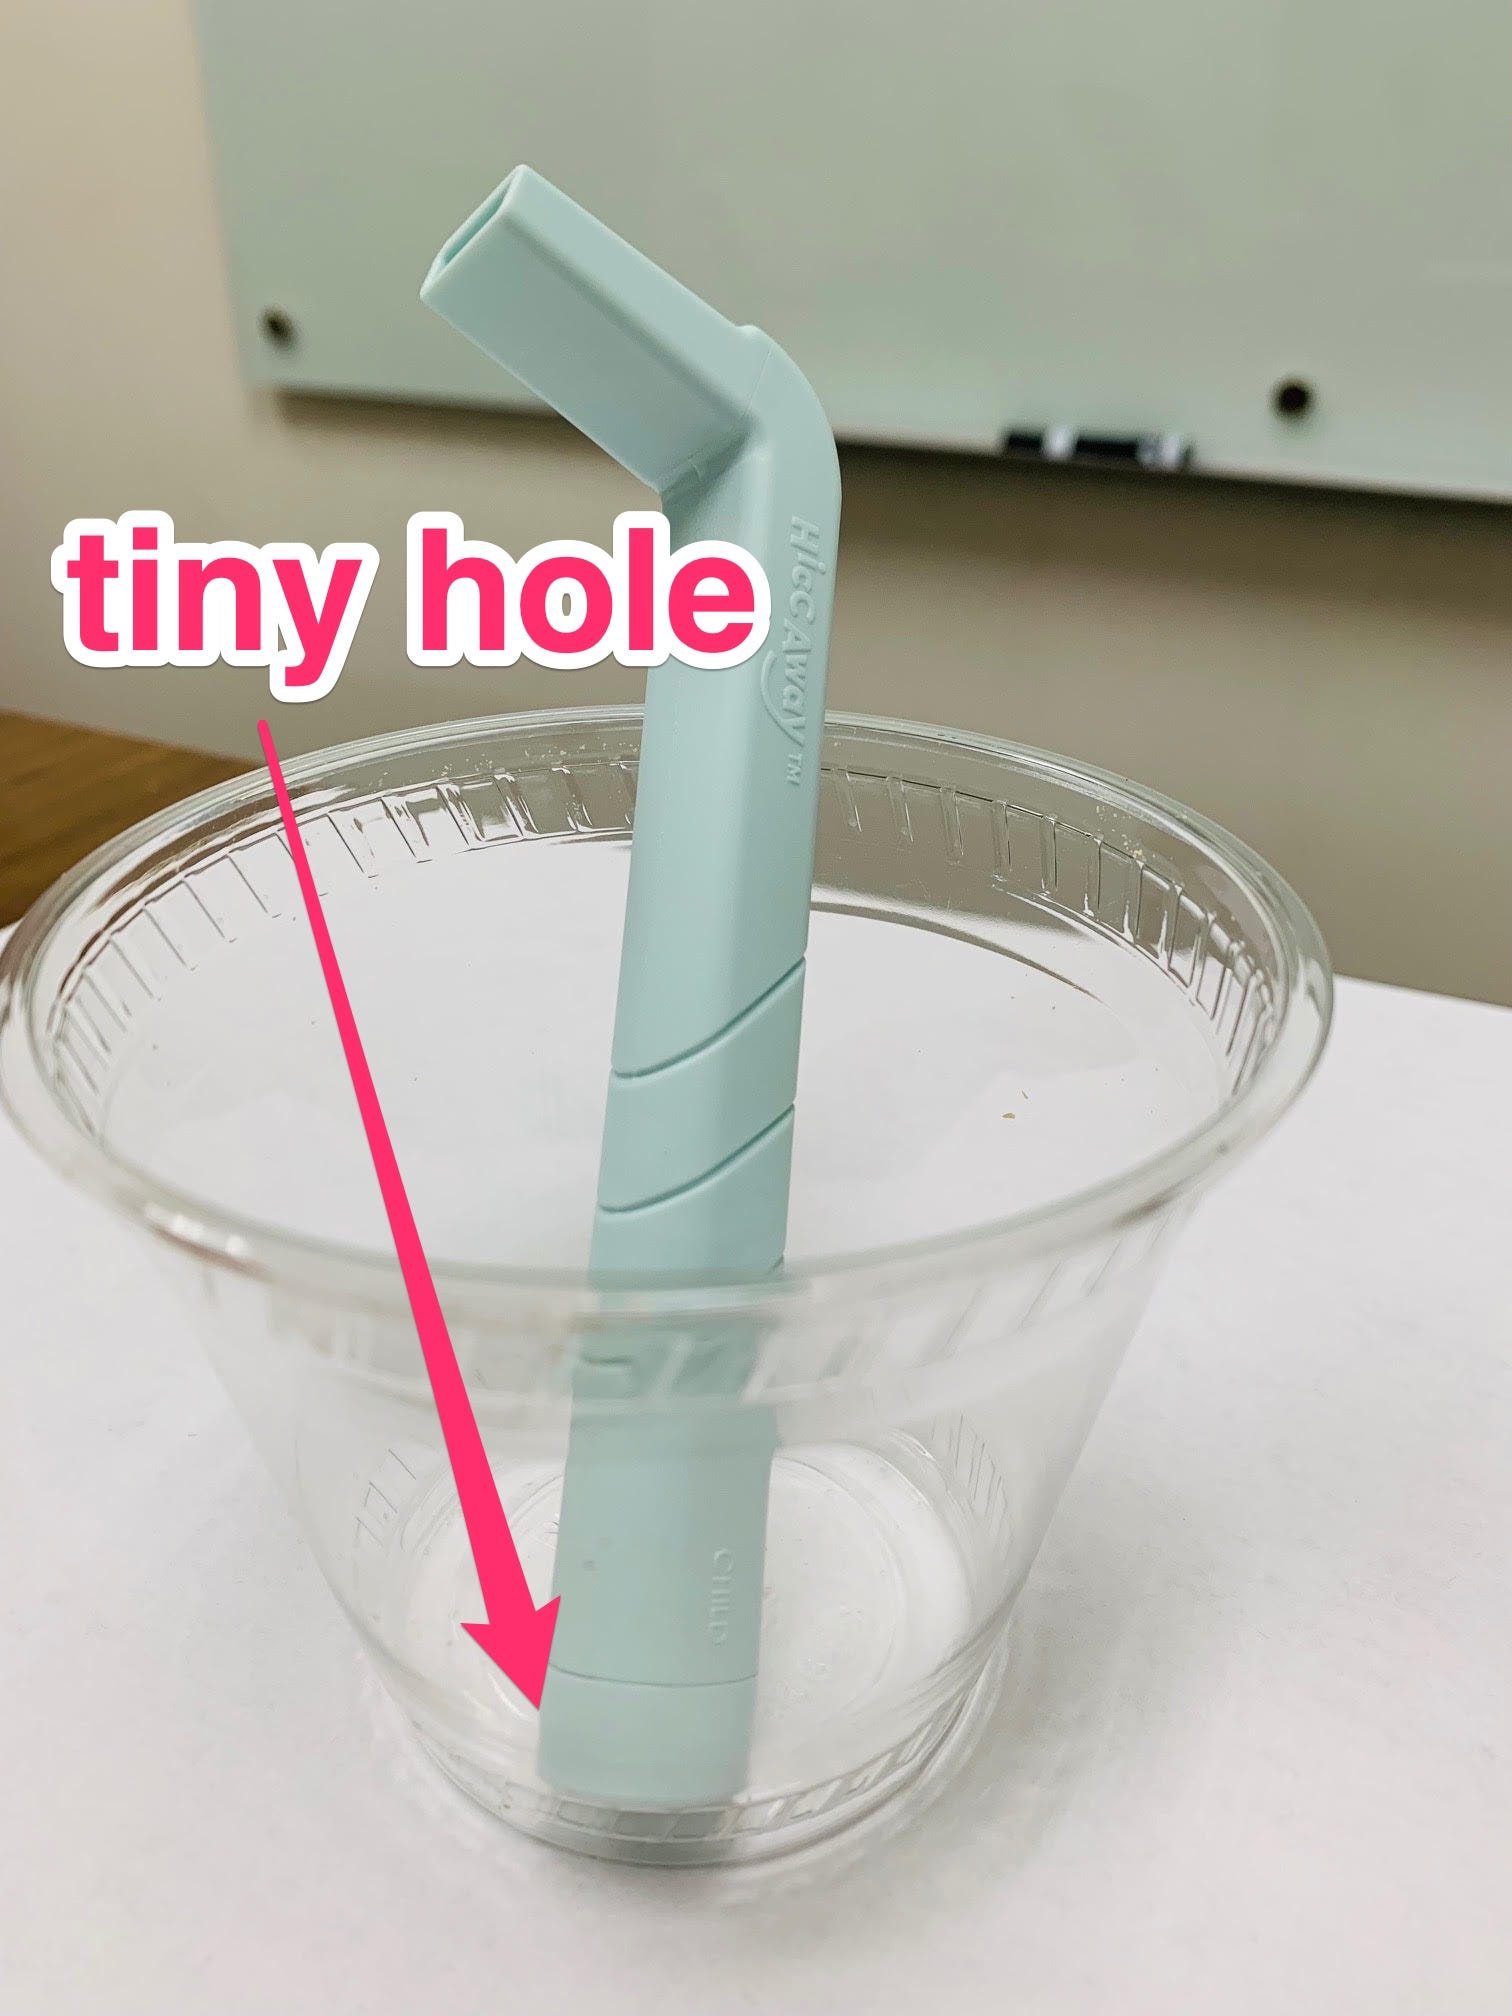 hiccaway thick straw for curing hiccups pictured in a cup